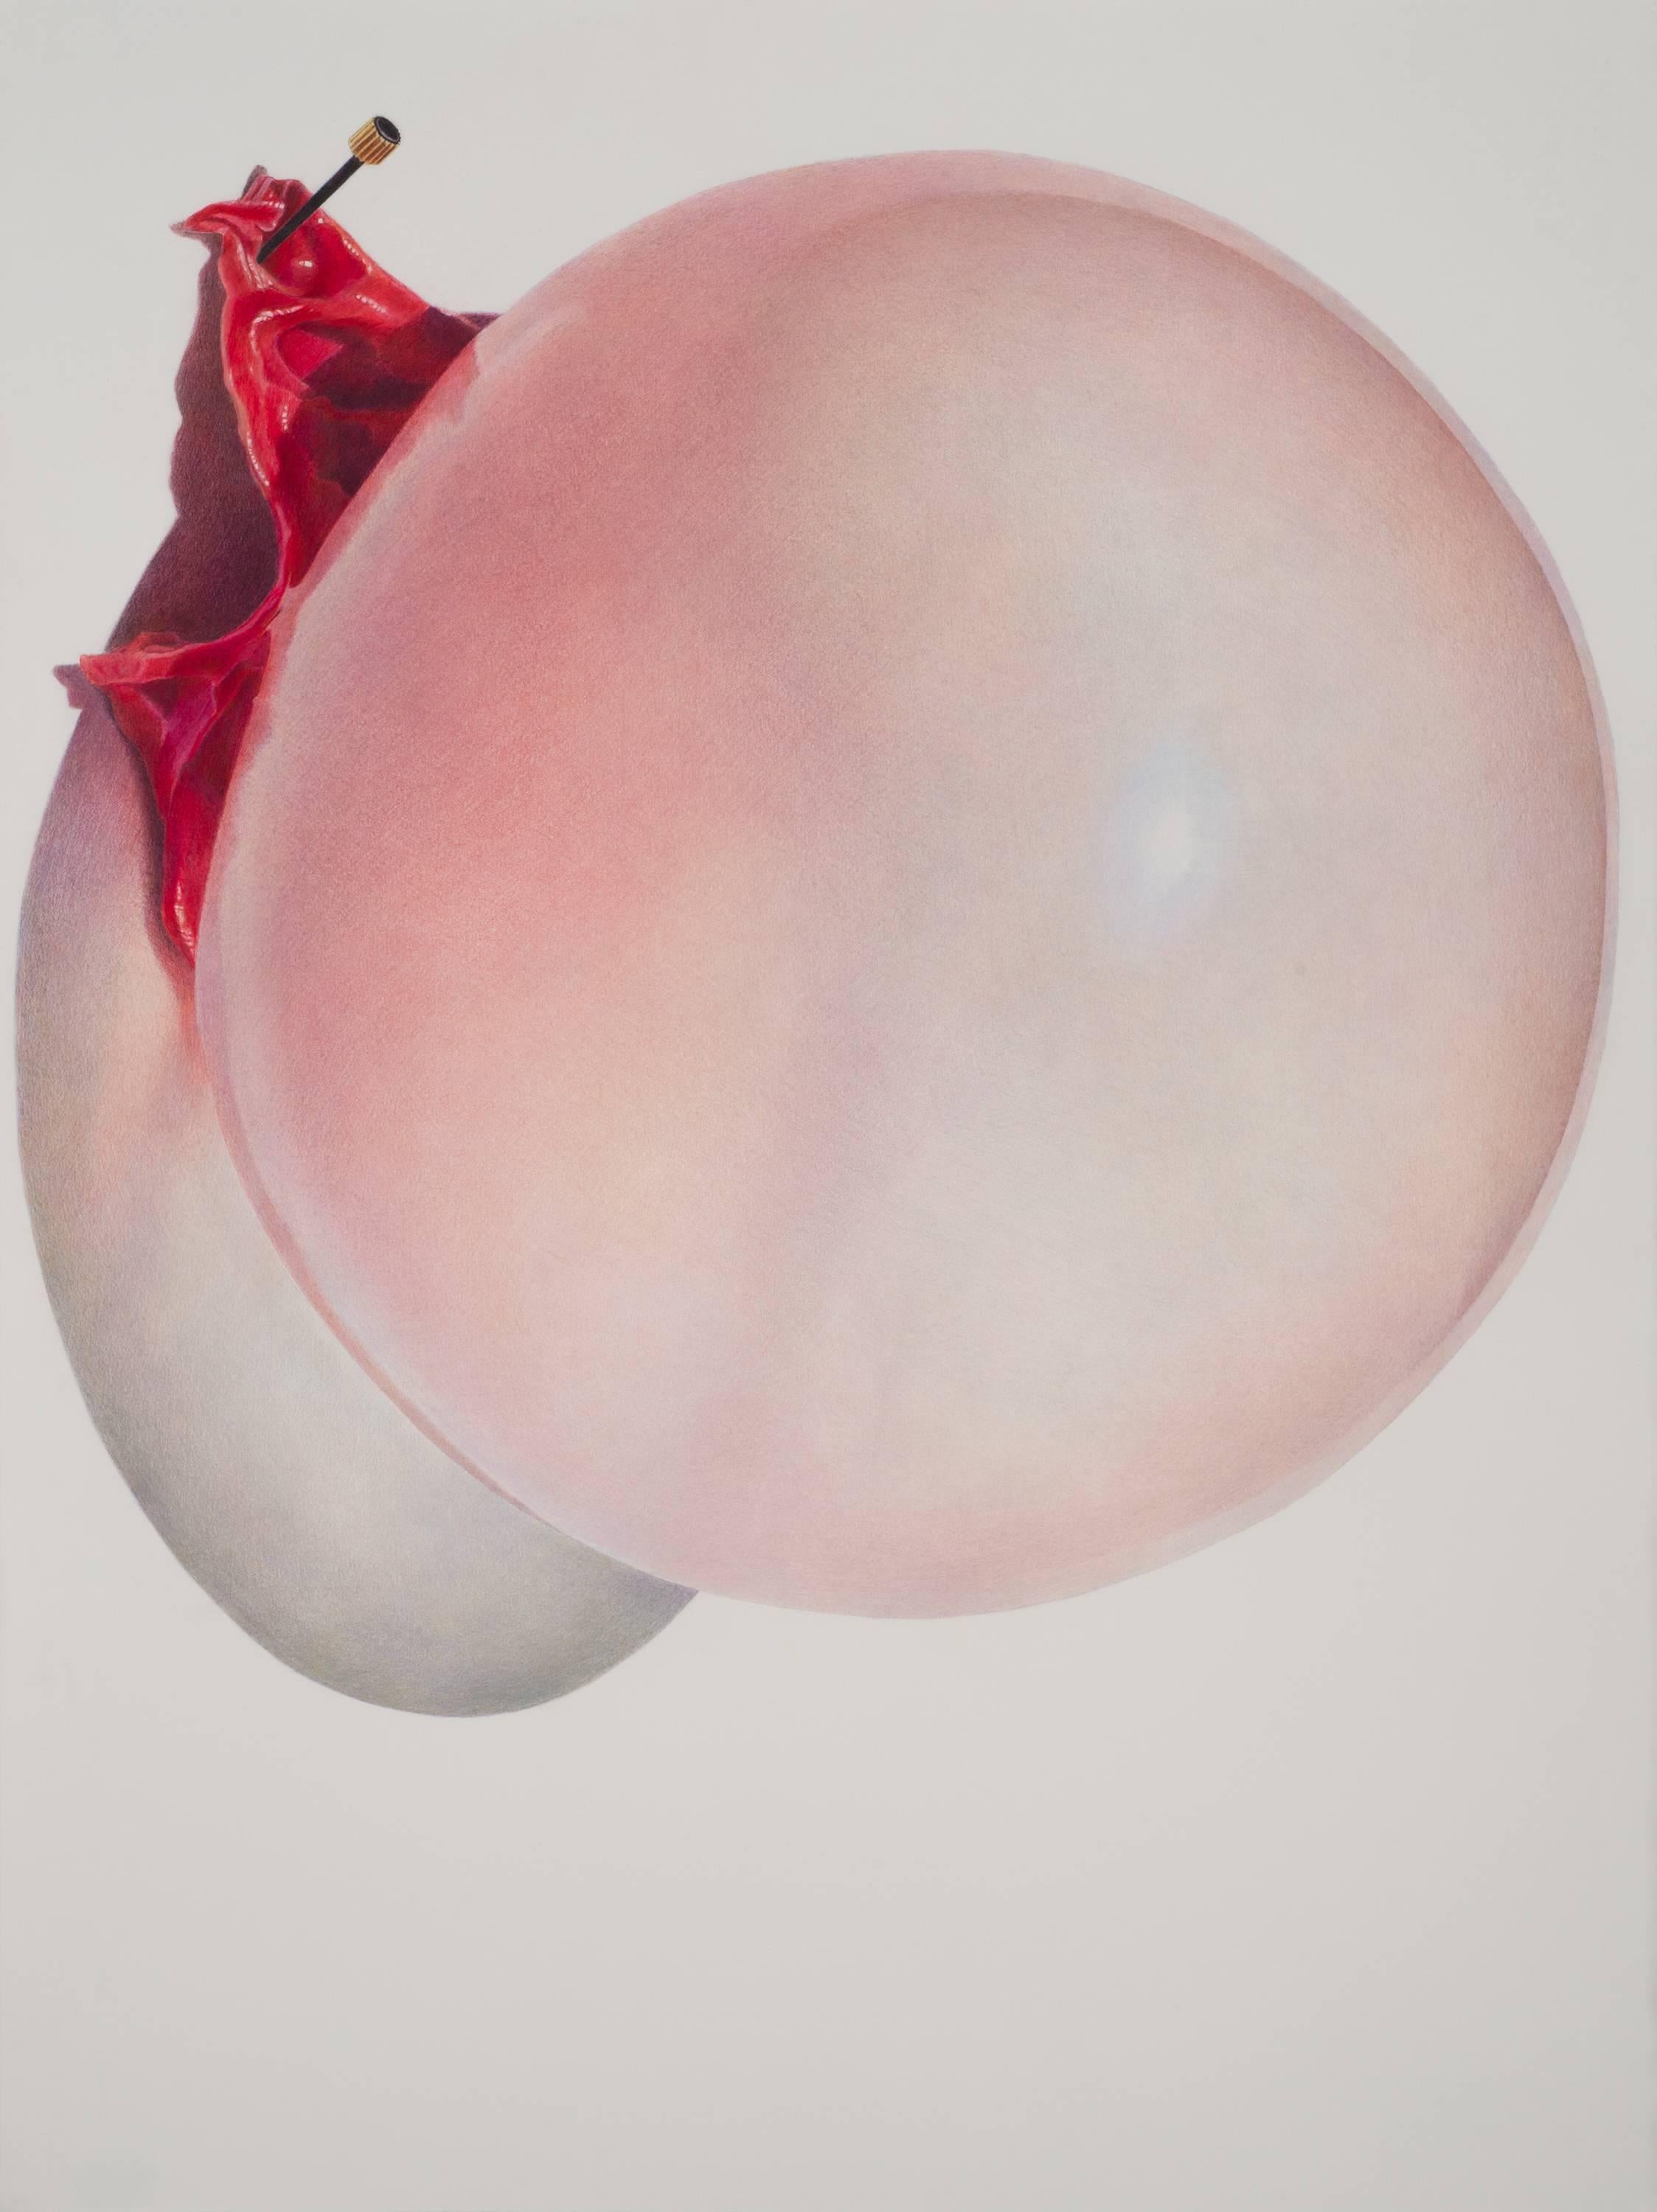 Julia Randall
Pinned Peach, 2013
Colored Pencil On Paper
30h x 22w in
Signature: Signed verso
Provenance: Artist to Garvey Simon Art Access, New York, NY
Exhibited:
2014  Julia Randall: Sticky,&quot; Real Art Ways, Hartford, CT
2014  Oral Fixations: